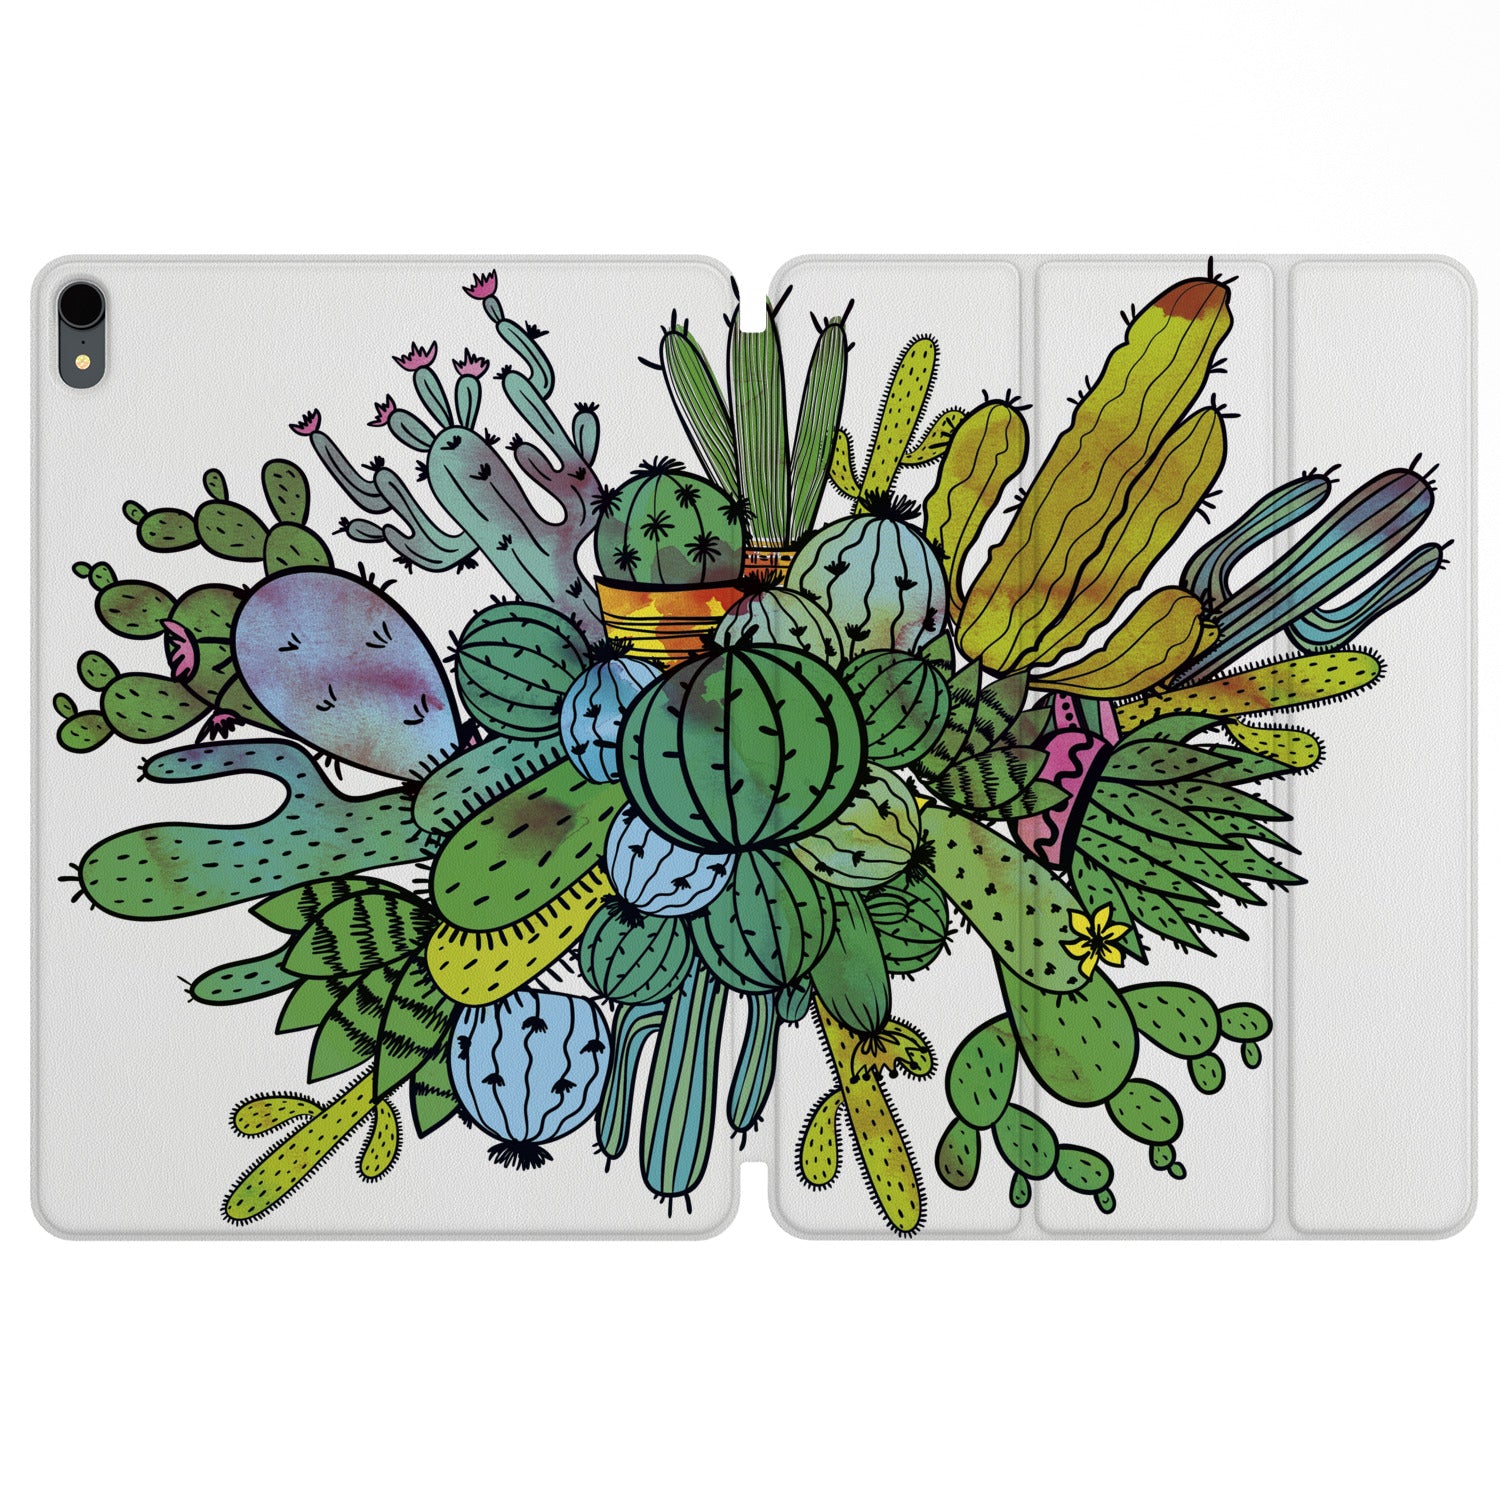 Lex Altern Magnetic iPad Case Abstract Cactus for your Apple tablet.